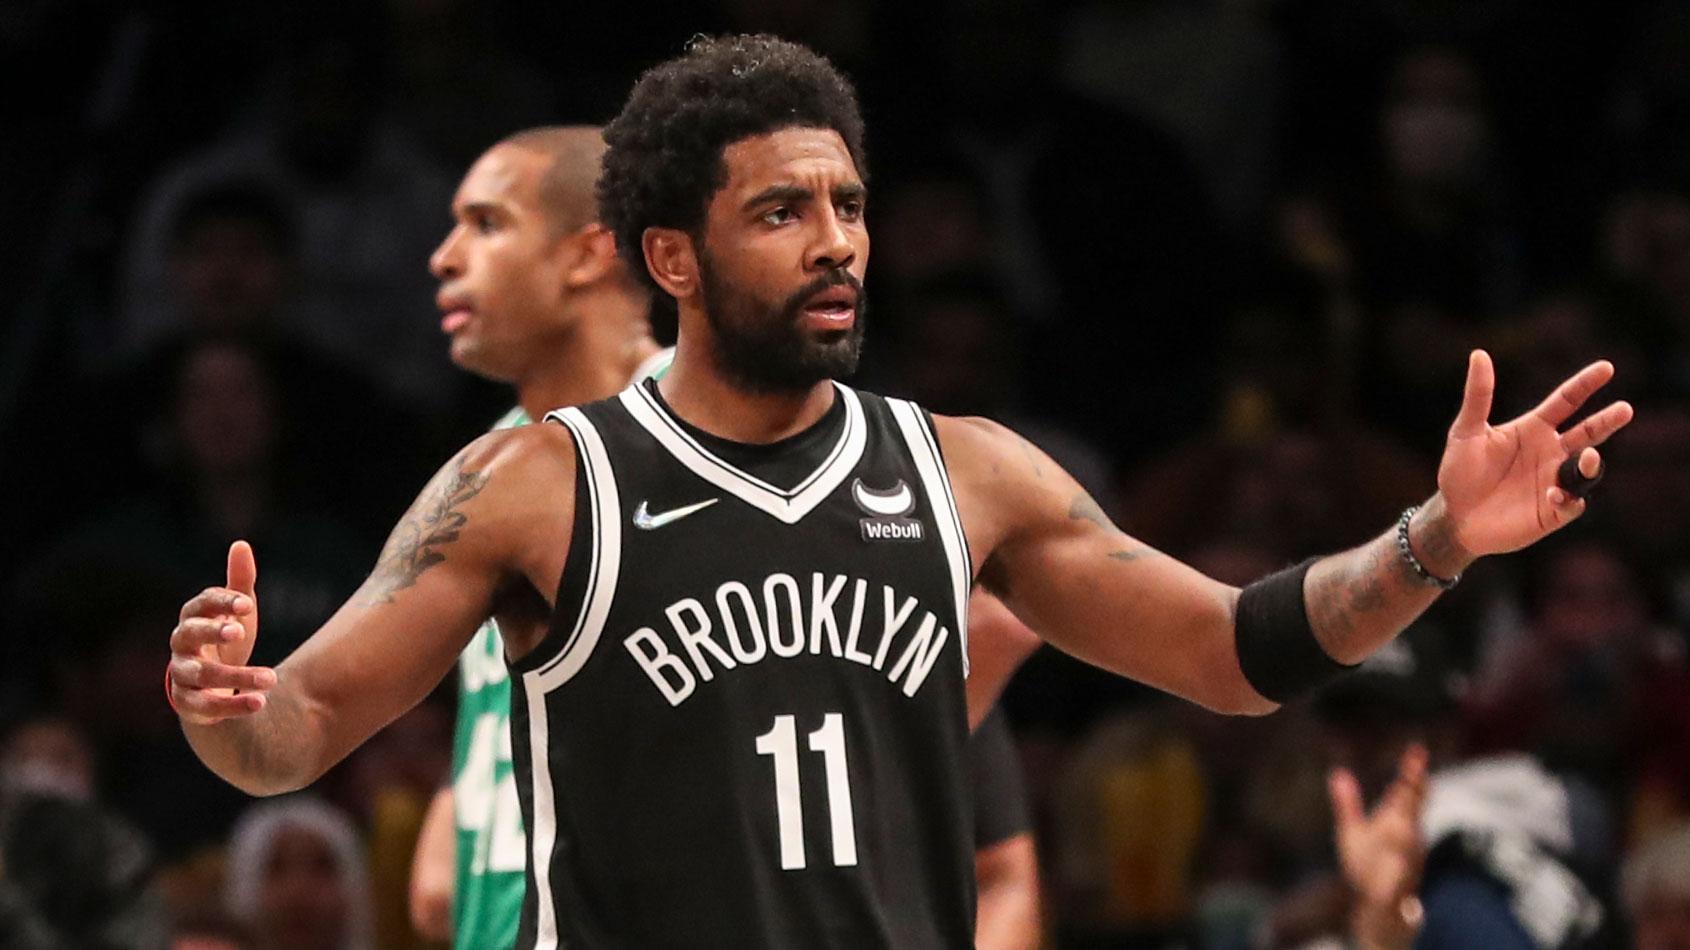 Apr 23, 2022; Brooklyn, New York, USA; Brooklyn Nets guard Kyrie Irving (11) looks towards an official after a call in the third quarter against the Boston Celtics at Barclays Center. / Wendell Cruz-USA TODAY Sports